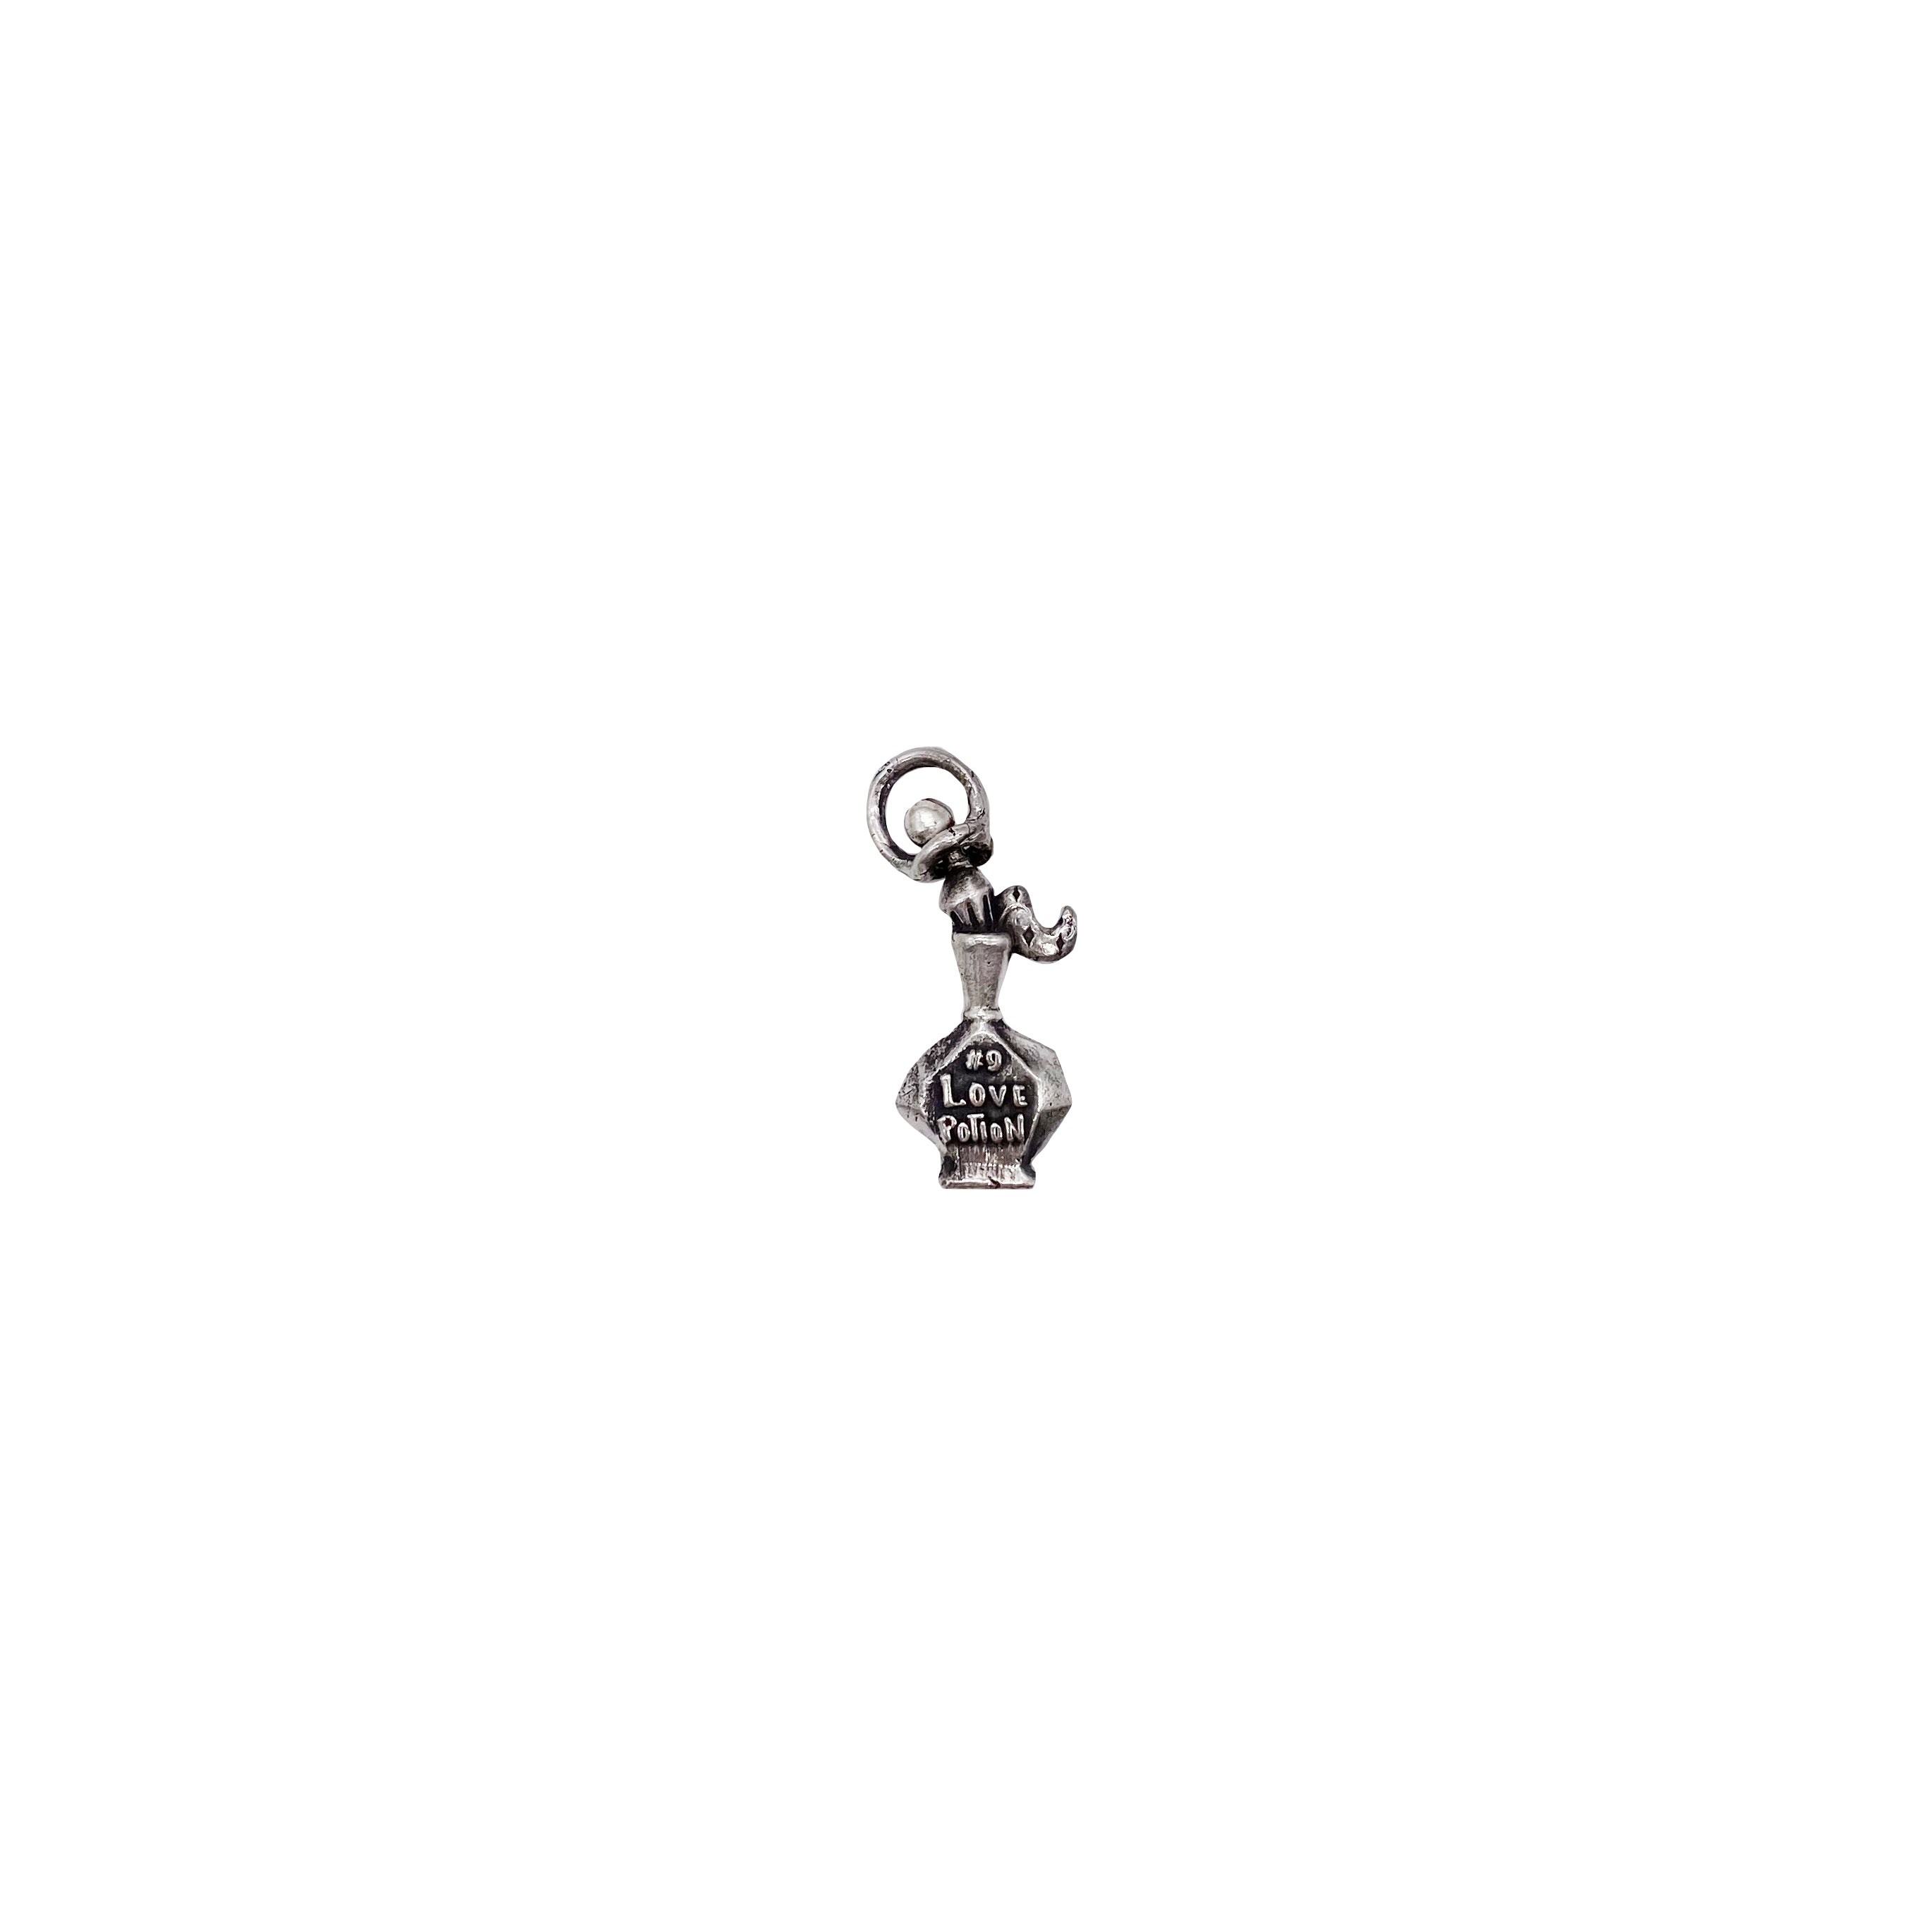 The Love Potion Charm